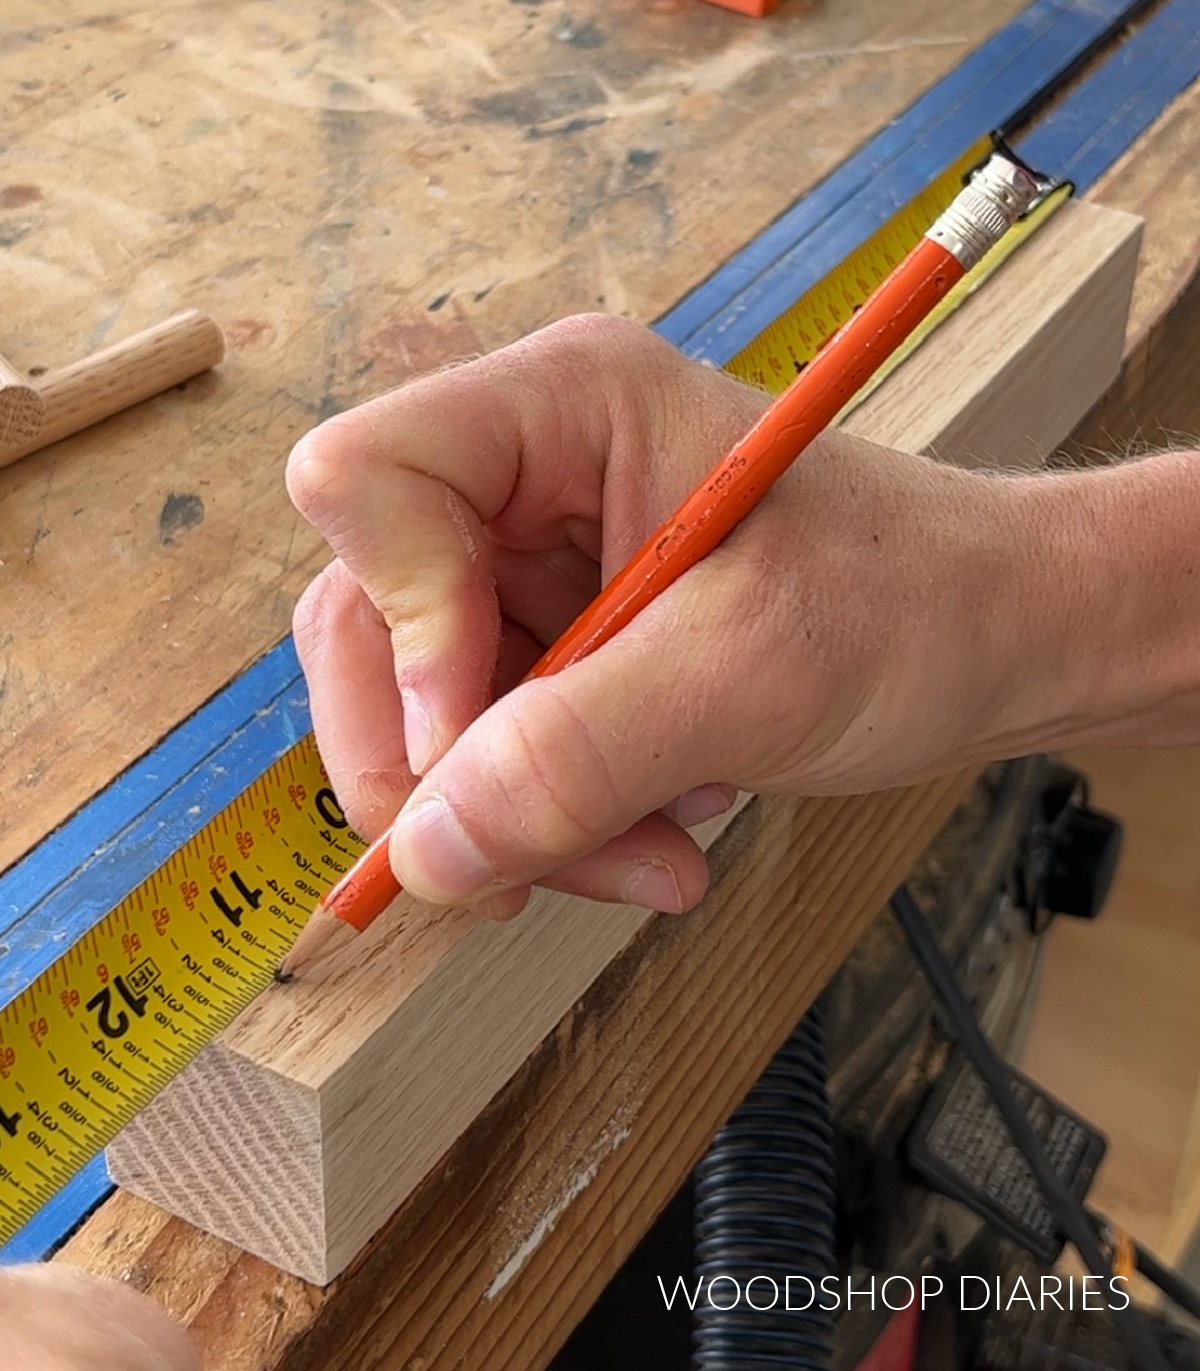 Marking 11 ¼" from bottom edge of board with pencil